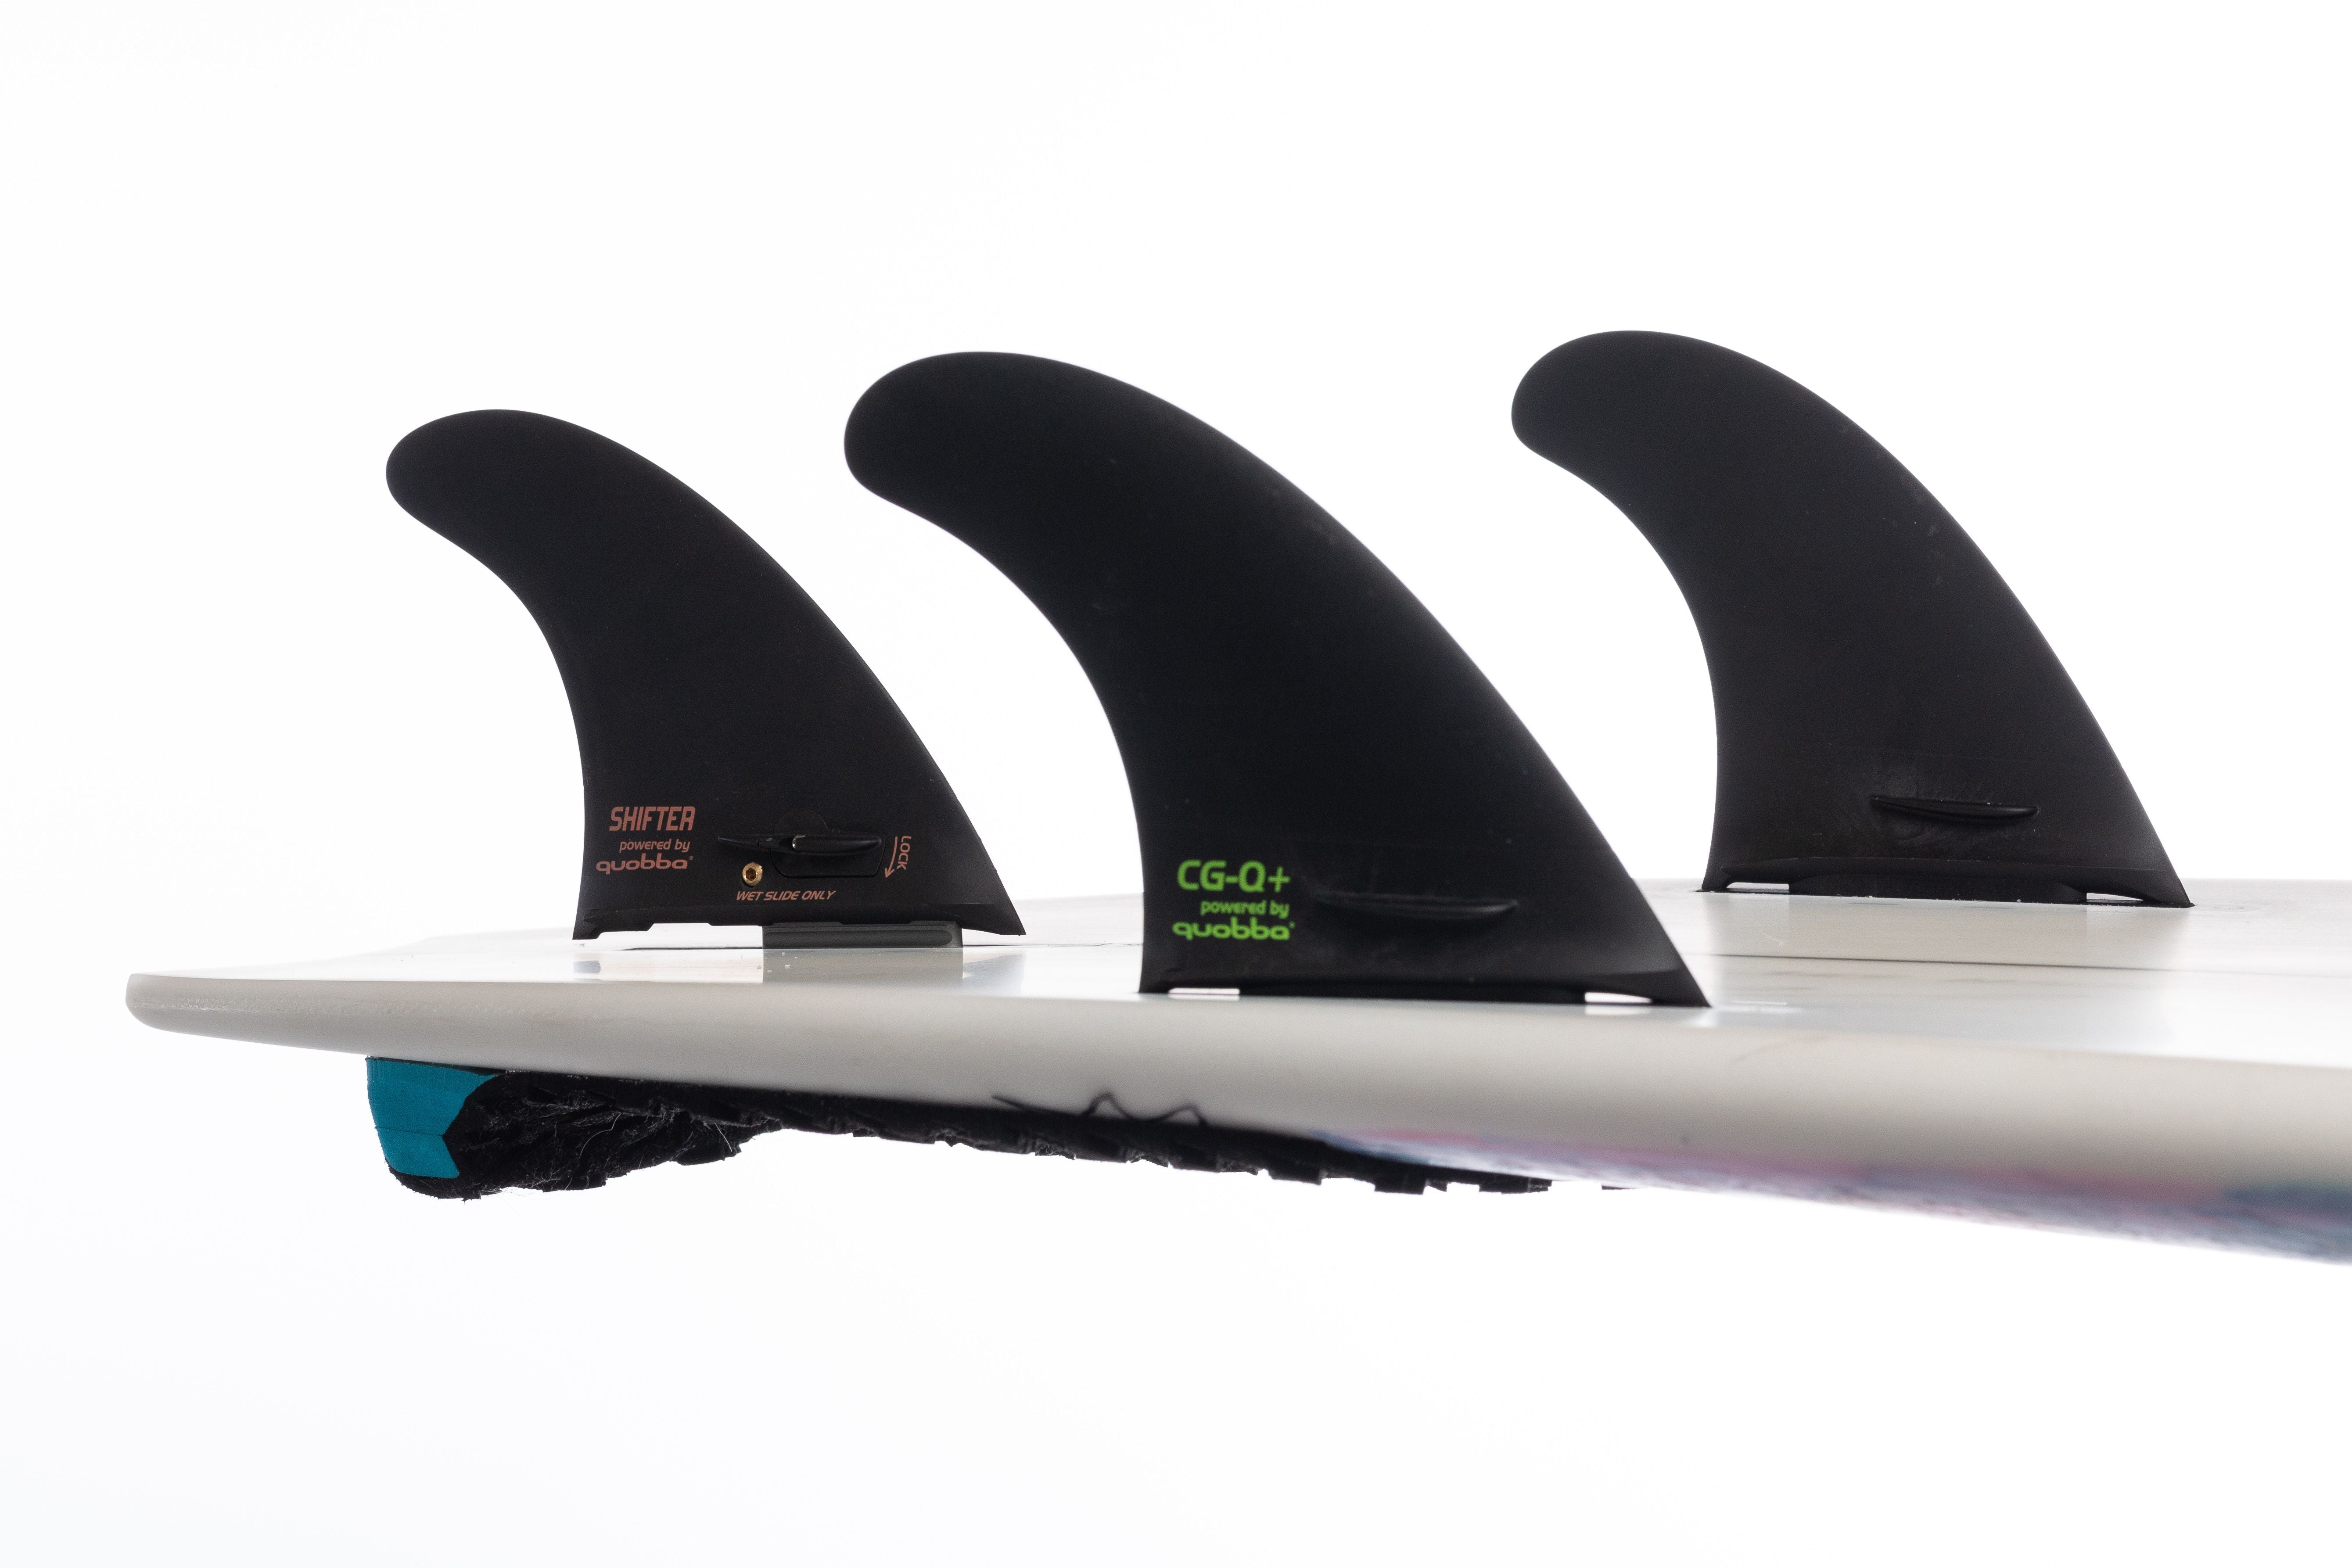 Buy Now - Shifter Fin Dual Tab + Thruster Set (4 x fins) Package